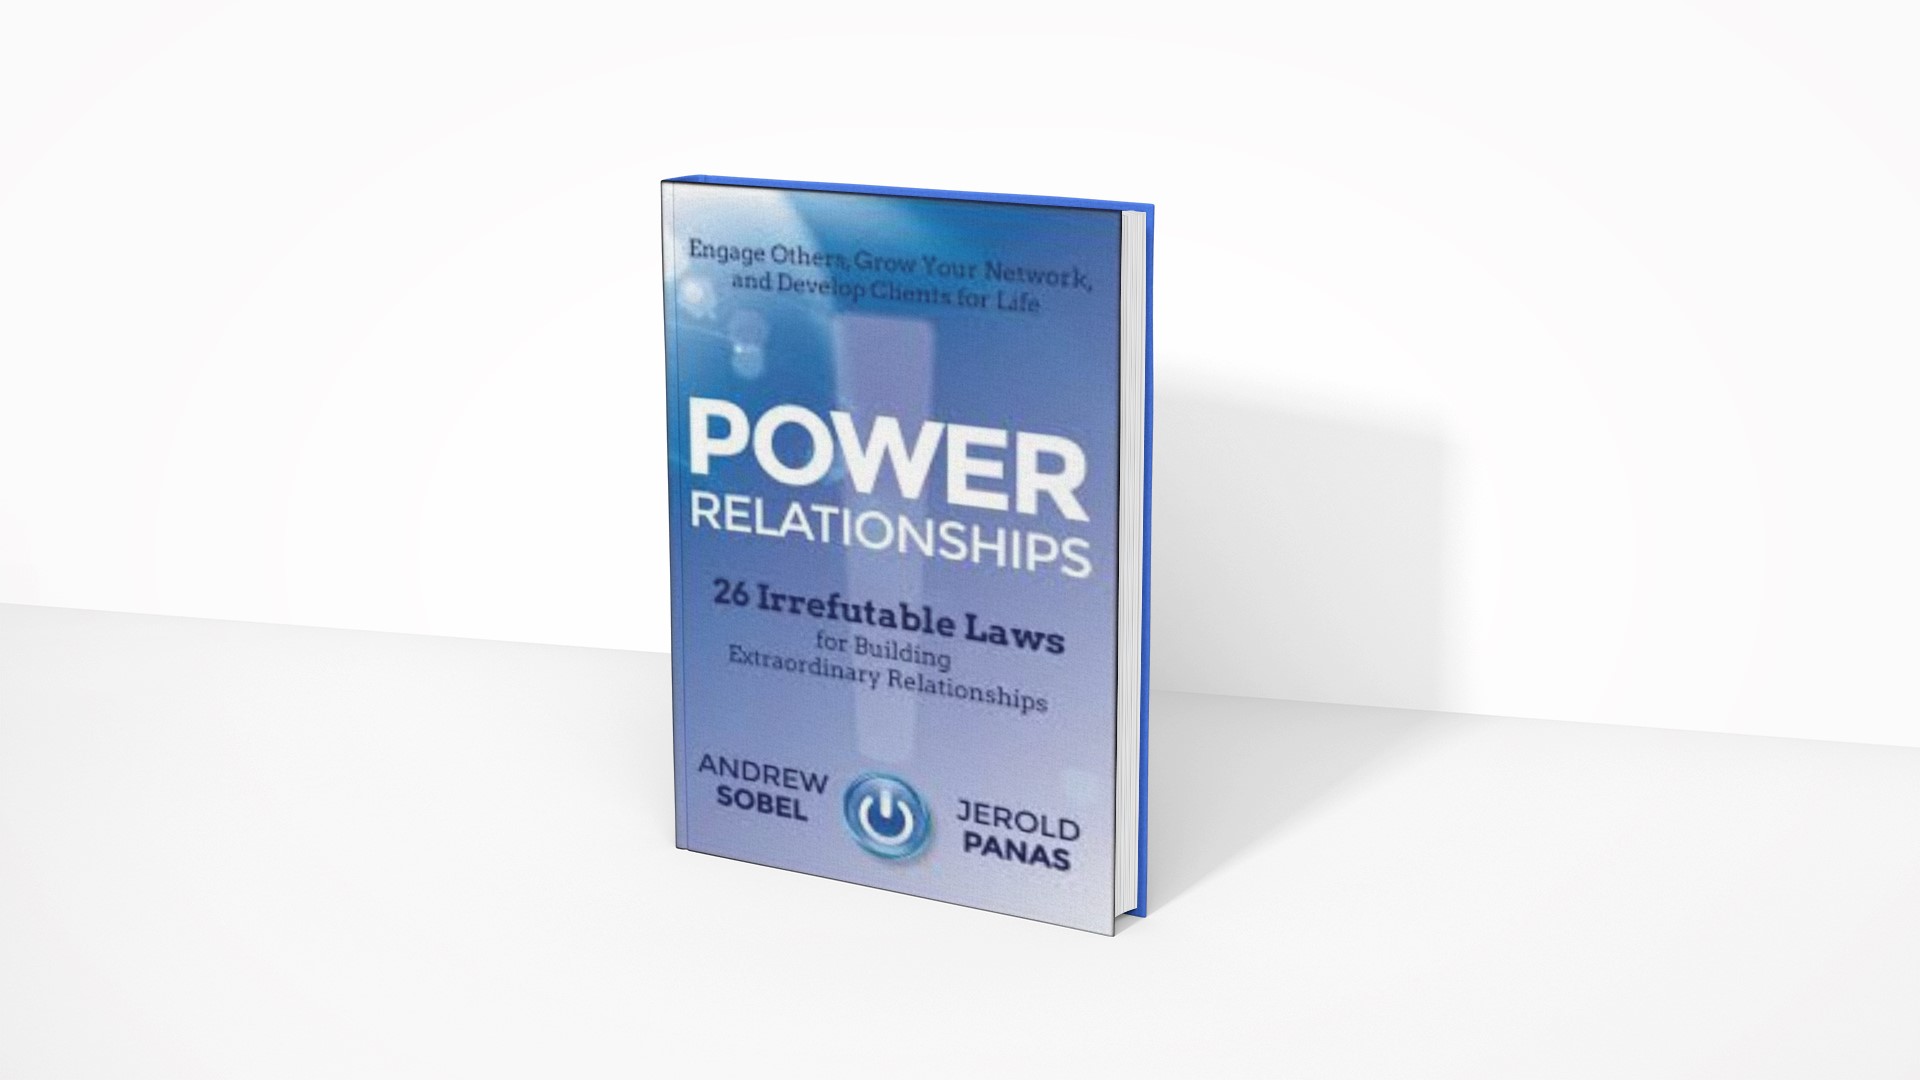 Power Relationships - Andrew Sobel and Jerold Panas